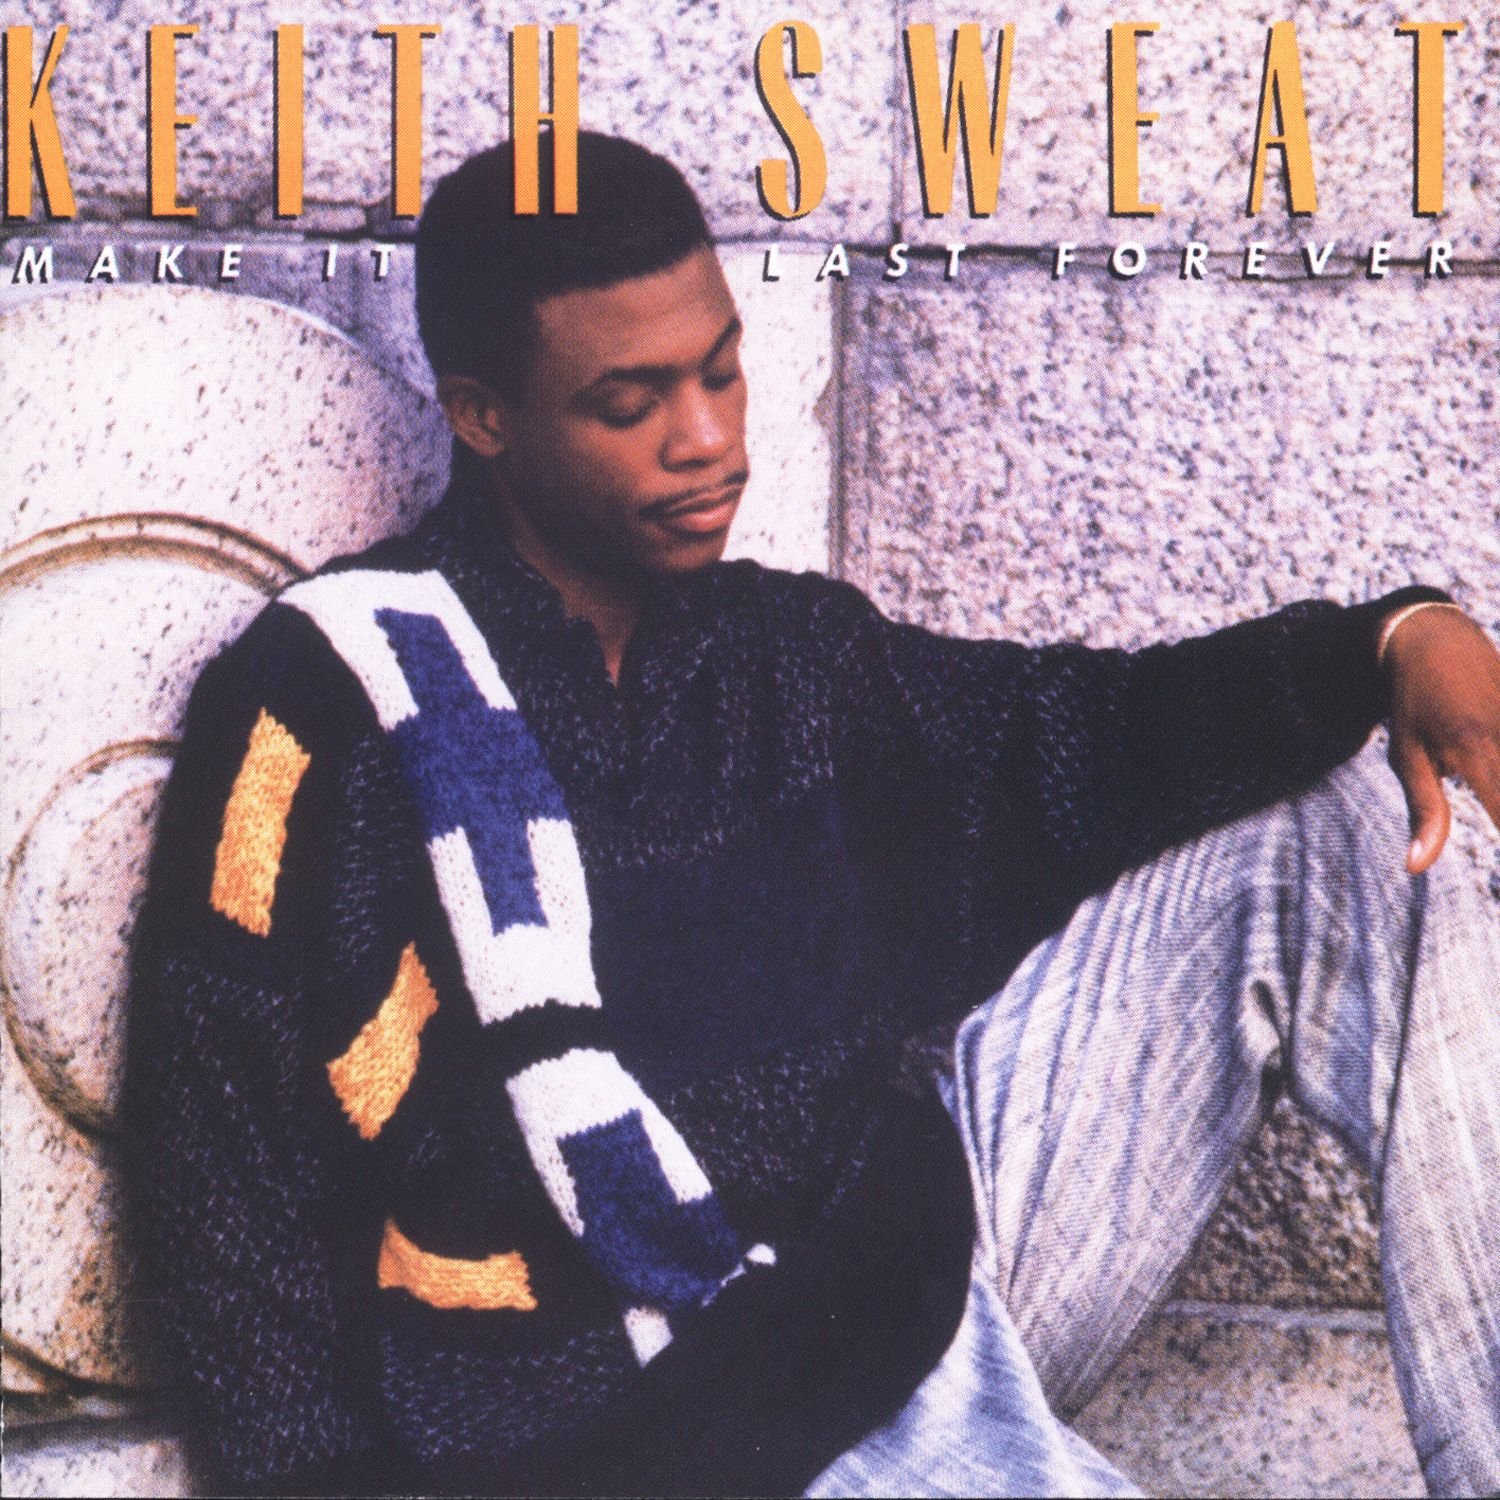 Art for Make It Last Forever (with Jacci McGhee) by Keith Sweat